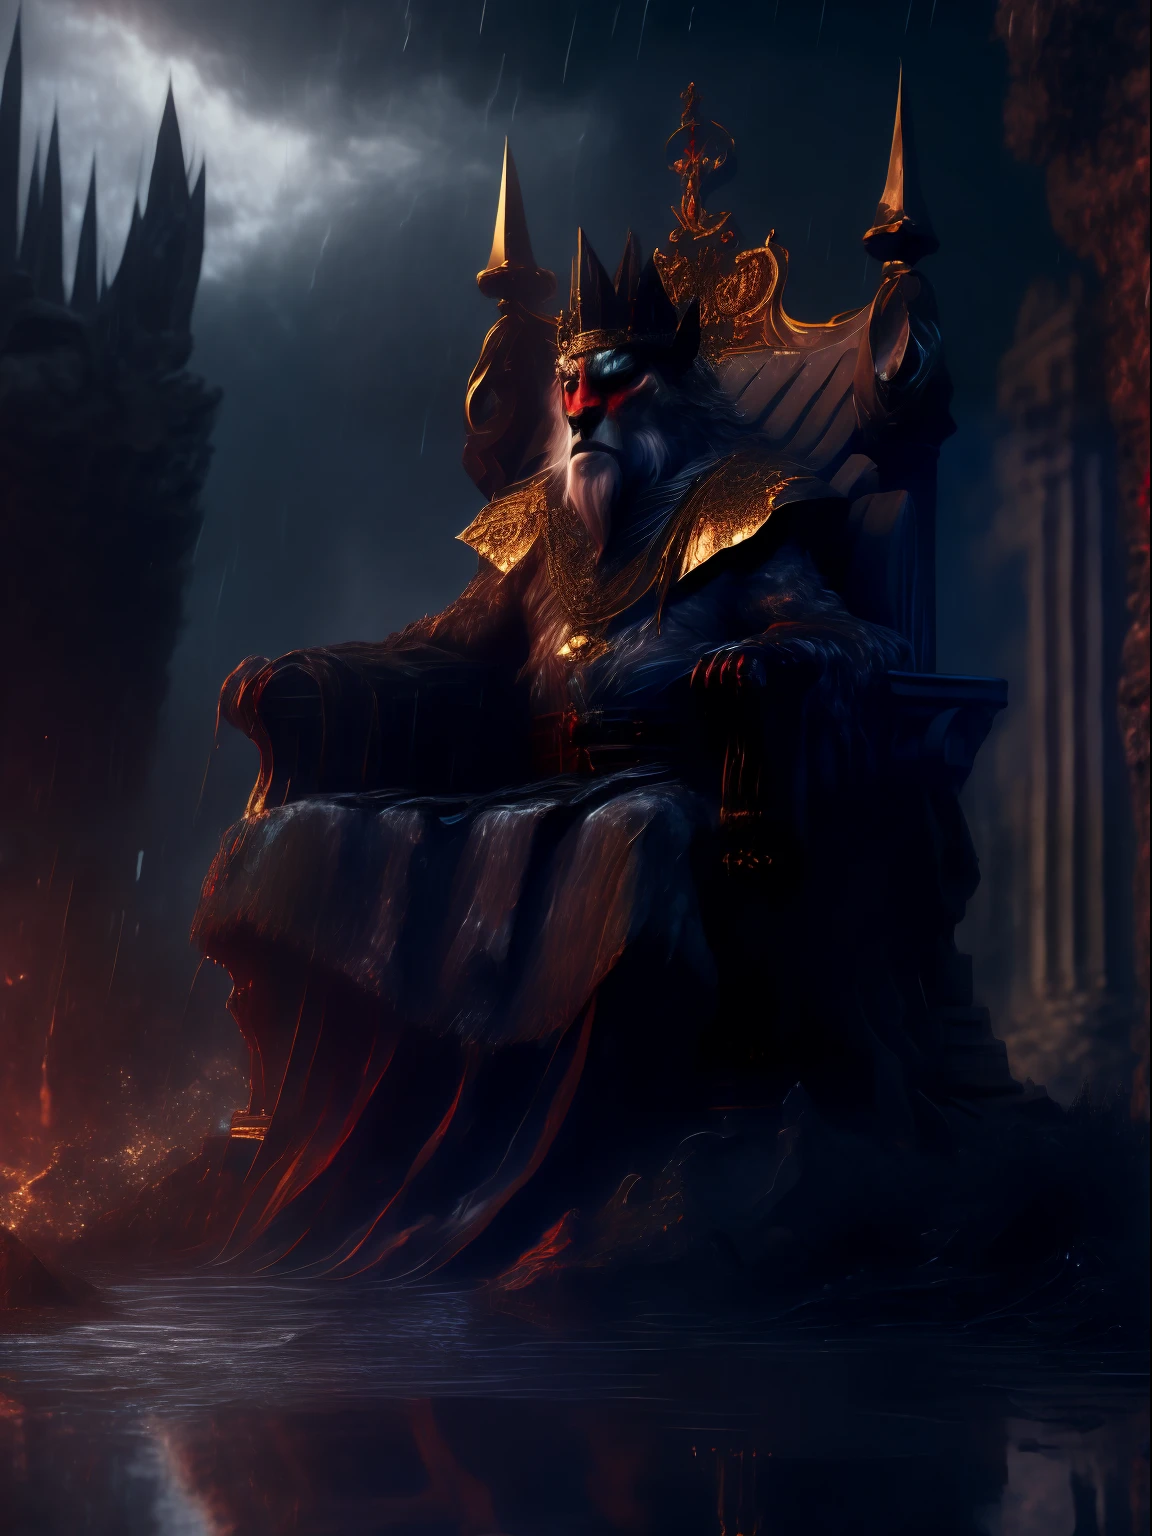 an old werewolf king sitting on the throne, with ((dos panteras with ojos rojos, very bright, sitting on both sides of the throne)), hyperreal, tension, Cold, Highly detailed, Sharp focus, professional, 8K UHD, in the heart of the city of Glas, the throne is a very wet place full of puddles and leaks, majestic, intimidating, Ornate armor, Royal Crown, blurred background, natural lighting, looking at the viewer, cinematic, dark, violent , Highly detailed 8K